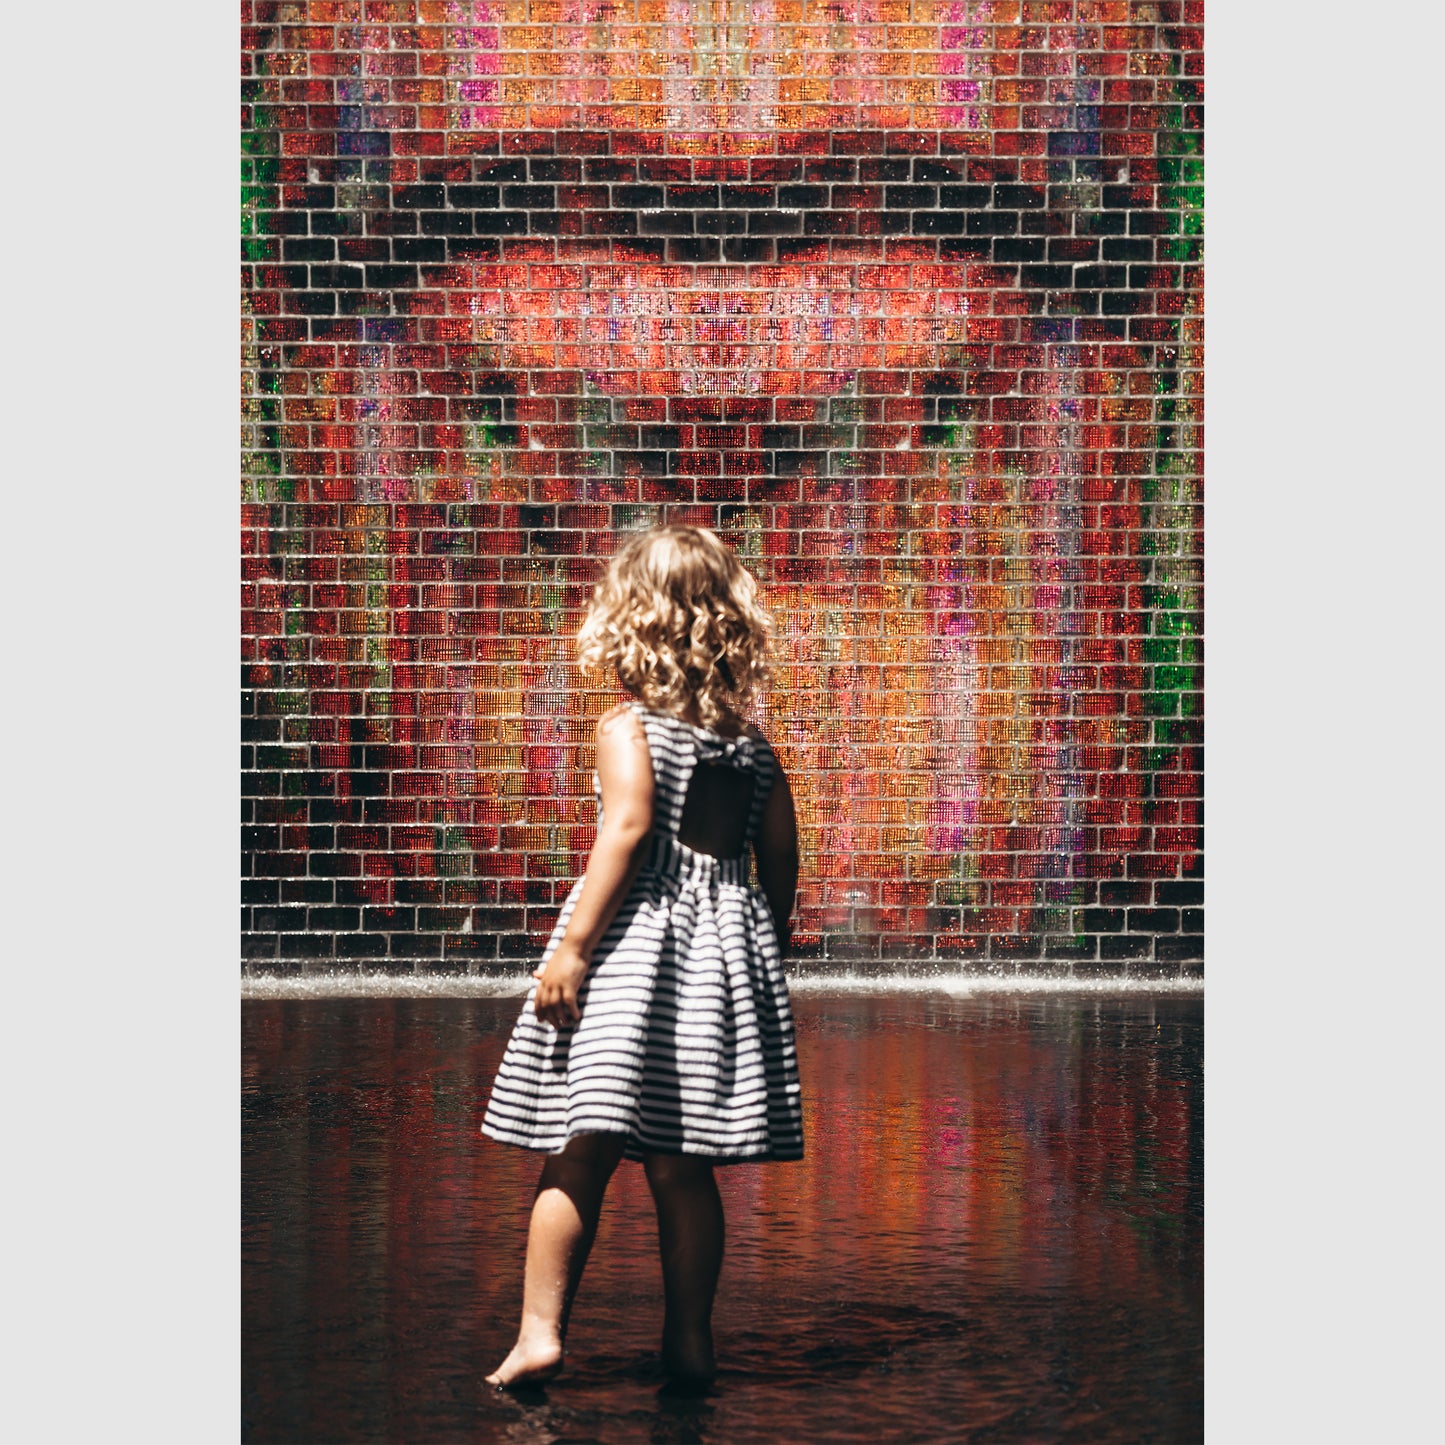 The Fight - Vannopics, Chicago, Crown Fountain, Day, Portrait, Vertical